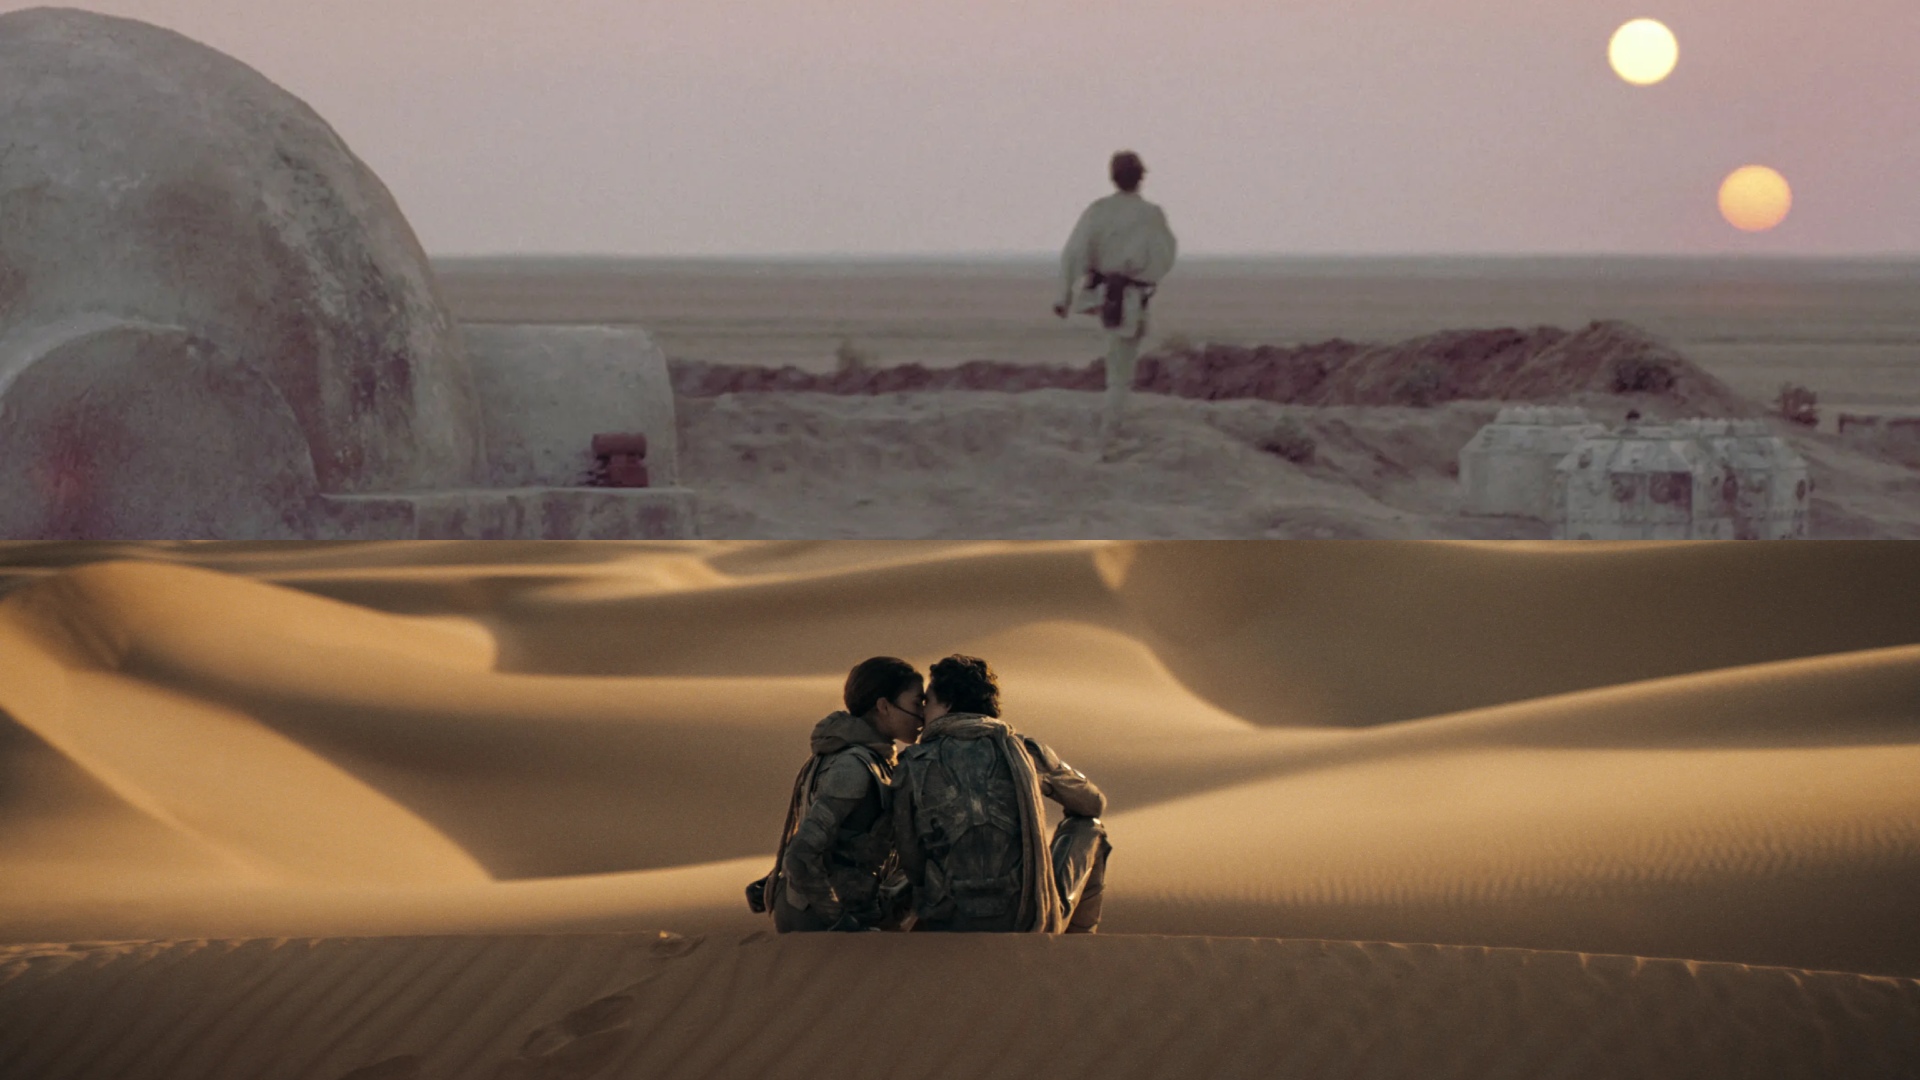 Can Dune be considered a copy of Star Wars?